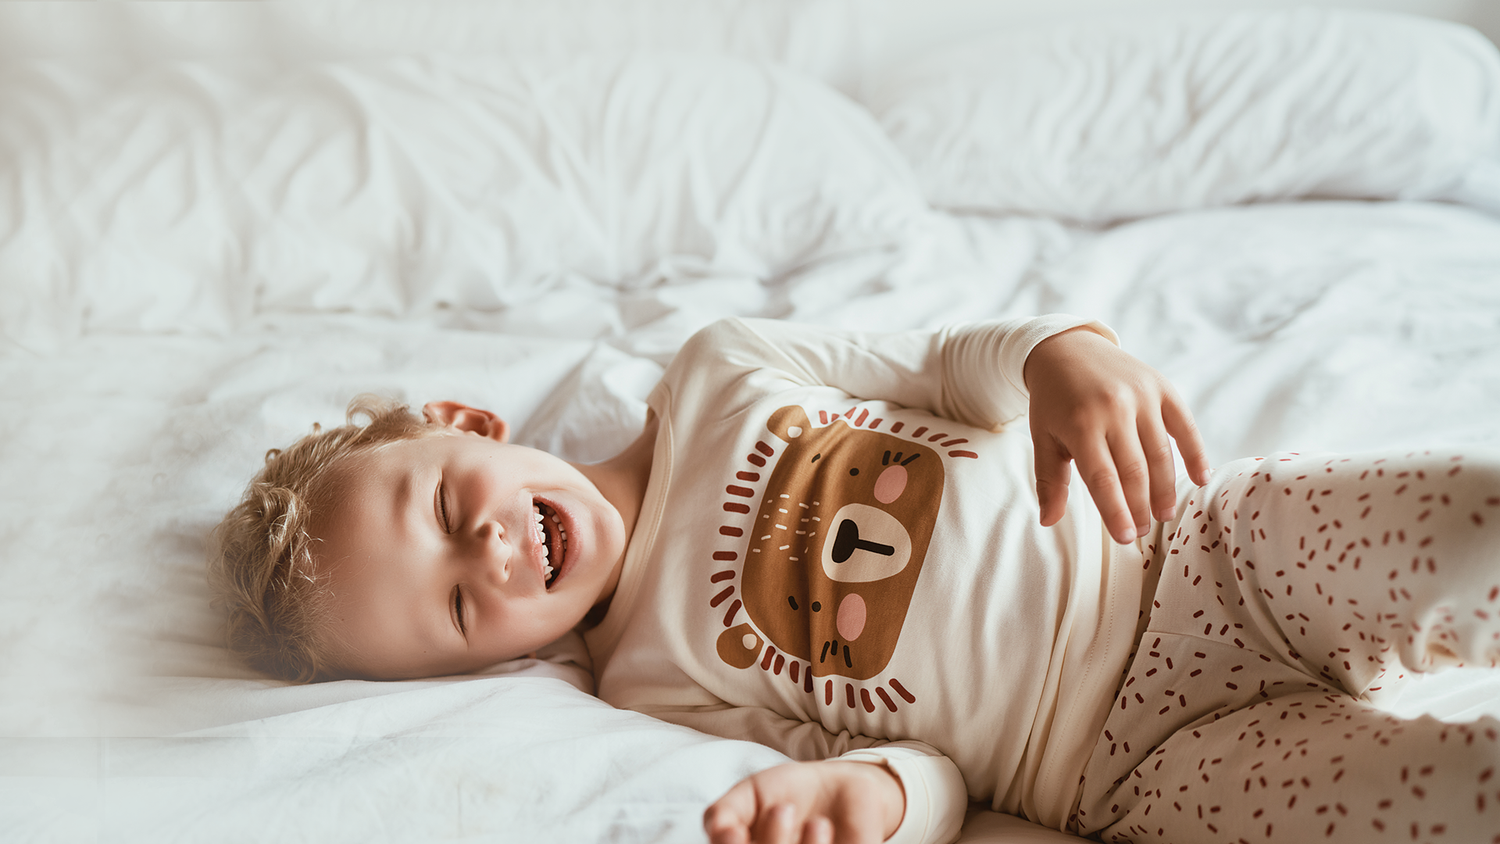 Happy Child in Comfortable Dreamy Lion Children's Pajamas Smiling while playing